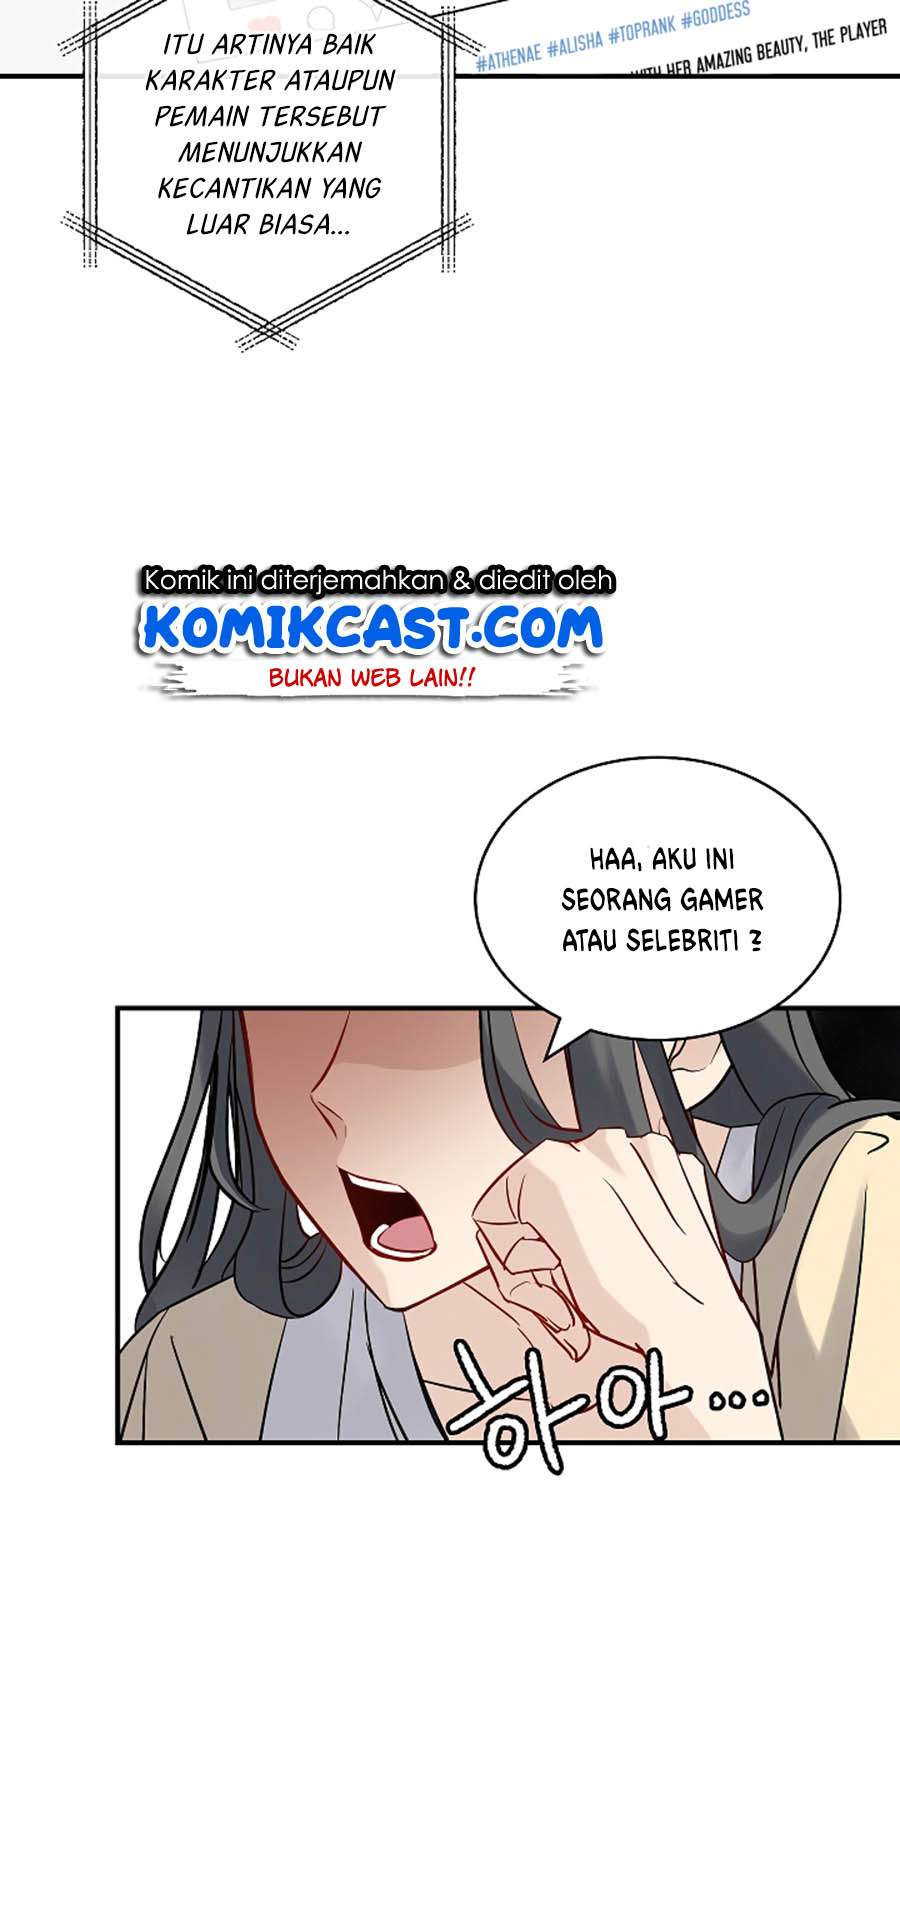 Leveling Up, By Only Eating! (Gourmet Gaming) Chapter 11 - 313